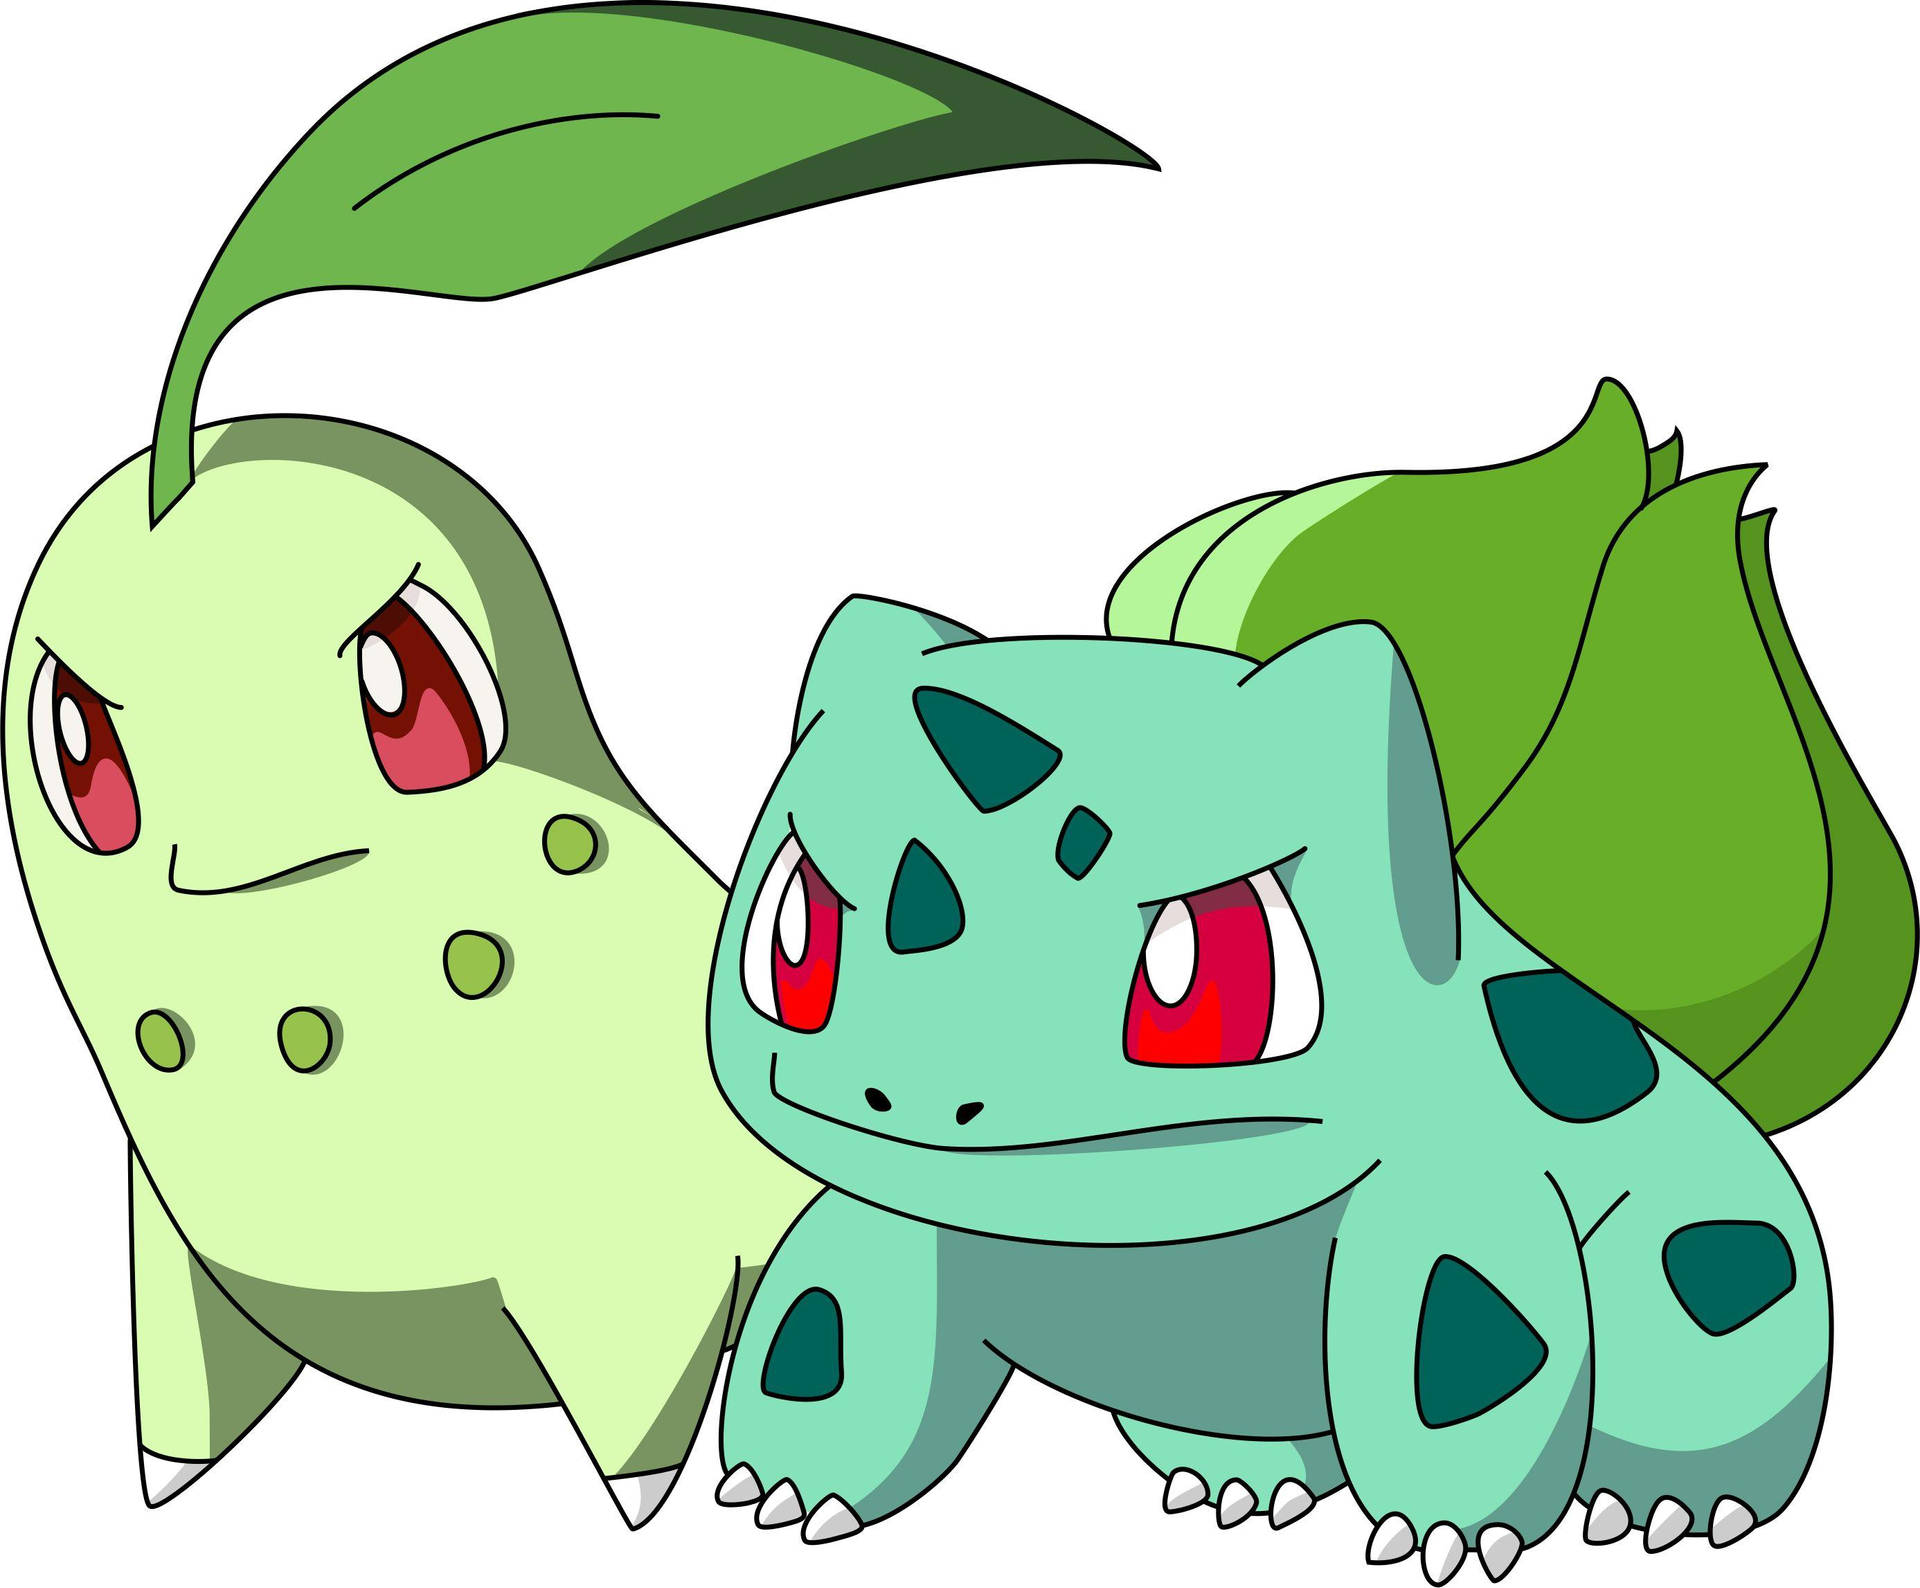 Bulbasaur 2773X2293 Wallpaper and Background Image